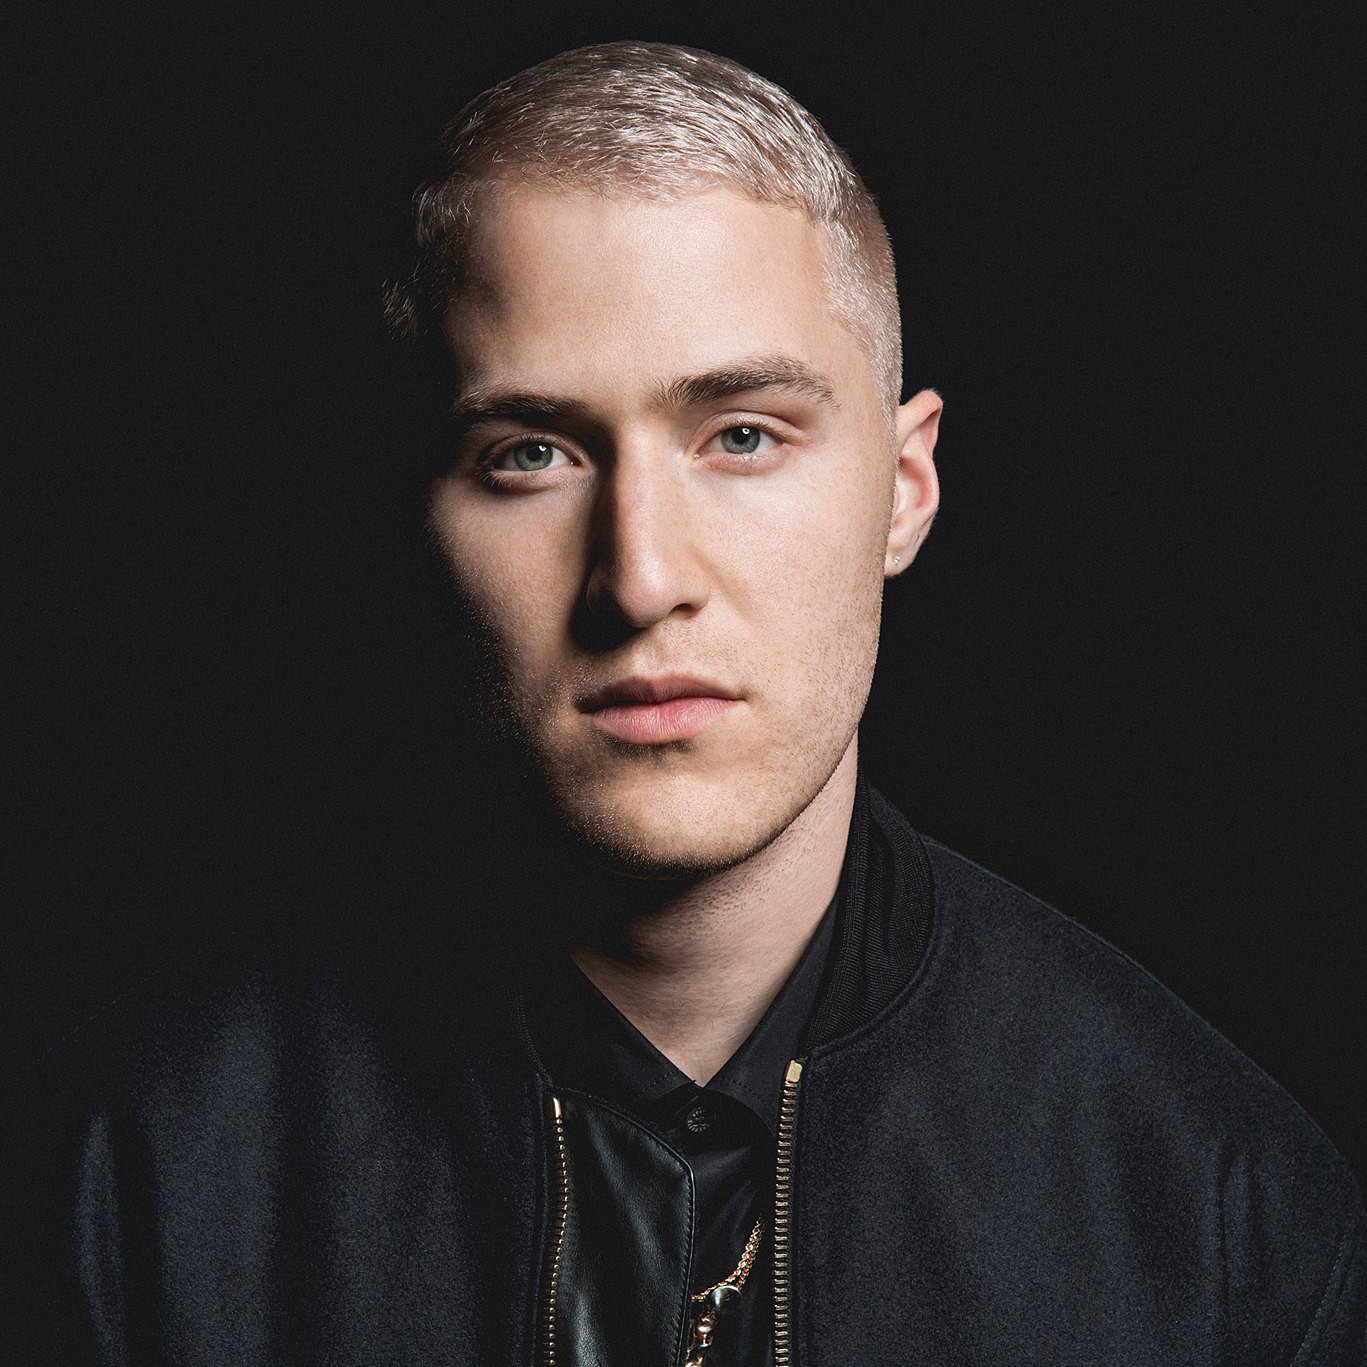 Mike Posner music, videos, stats, and photos | Last.fm